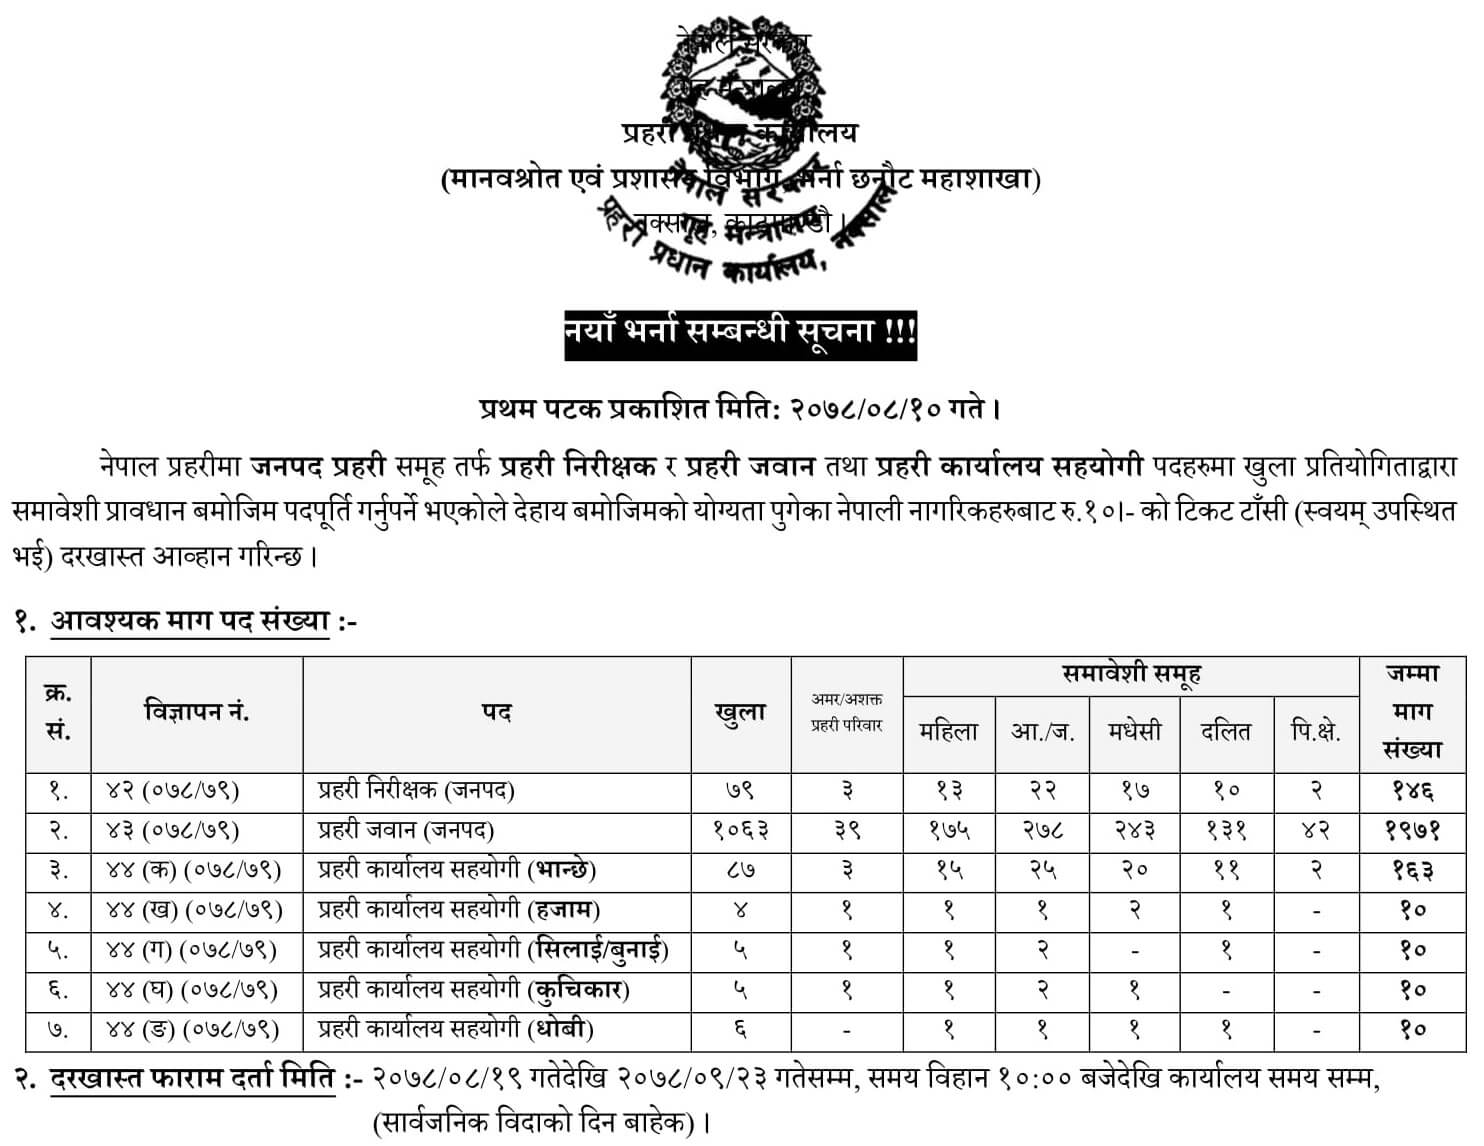 Nepal Police Vacancy for Police Inspector, Police Constable (Jawan) and Police Office Assistant.